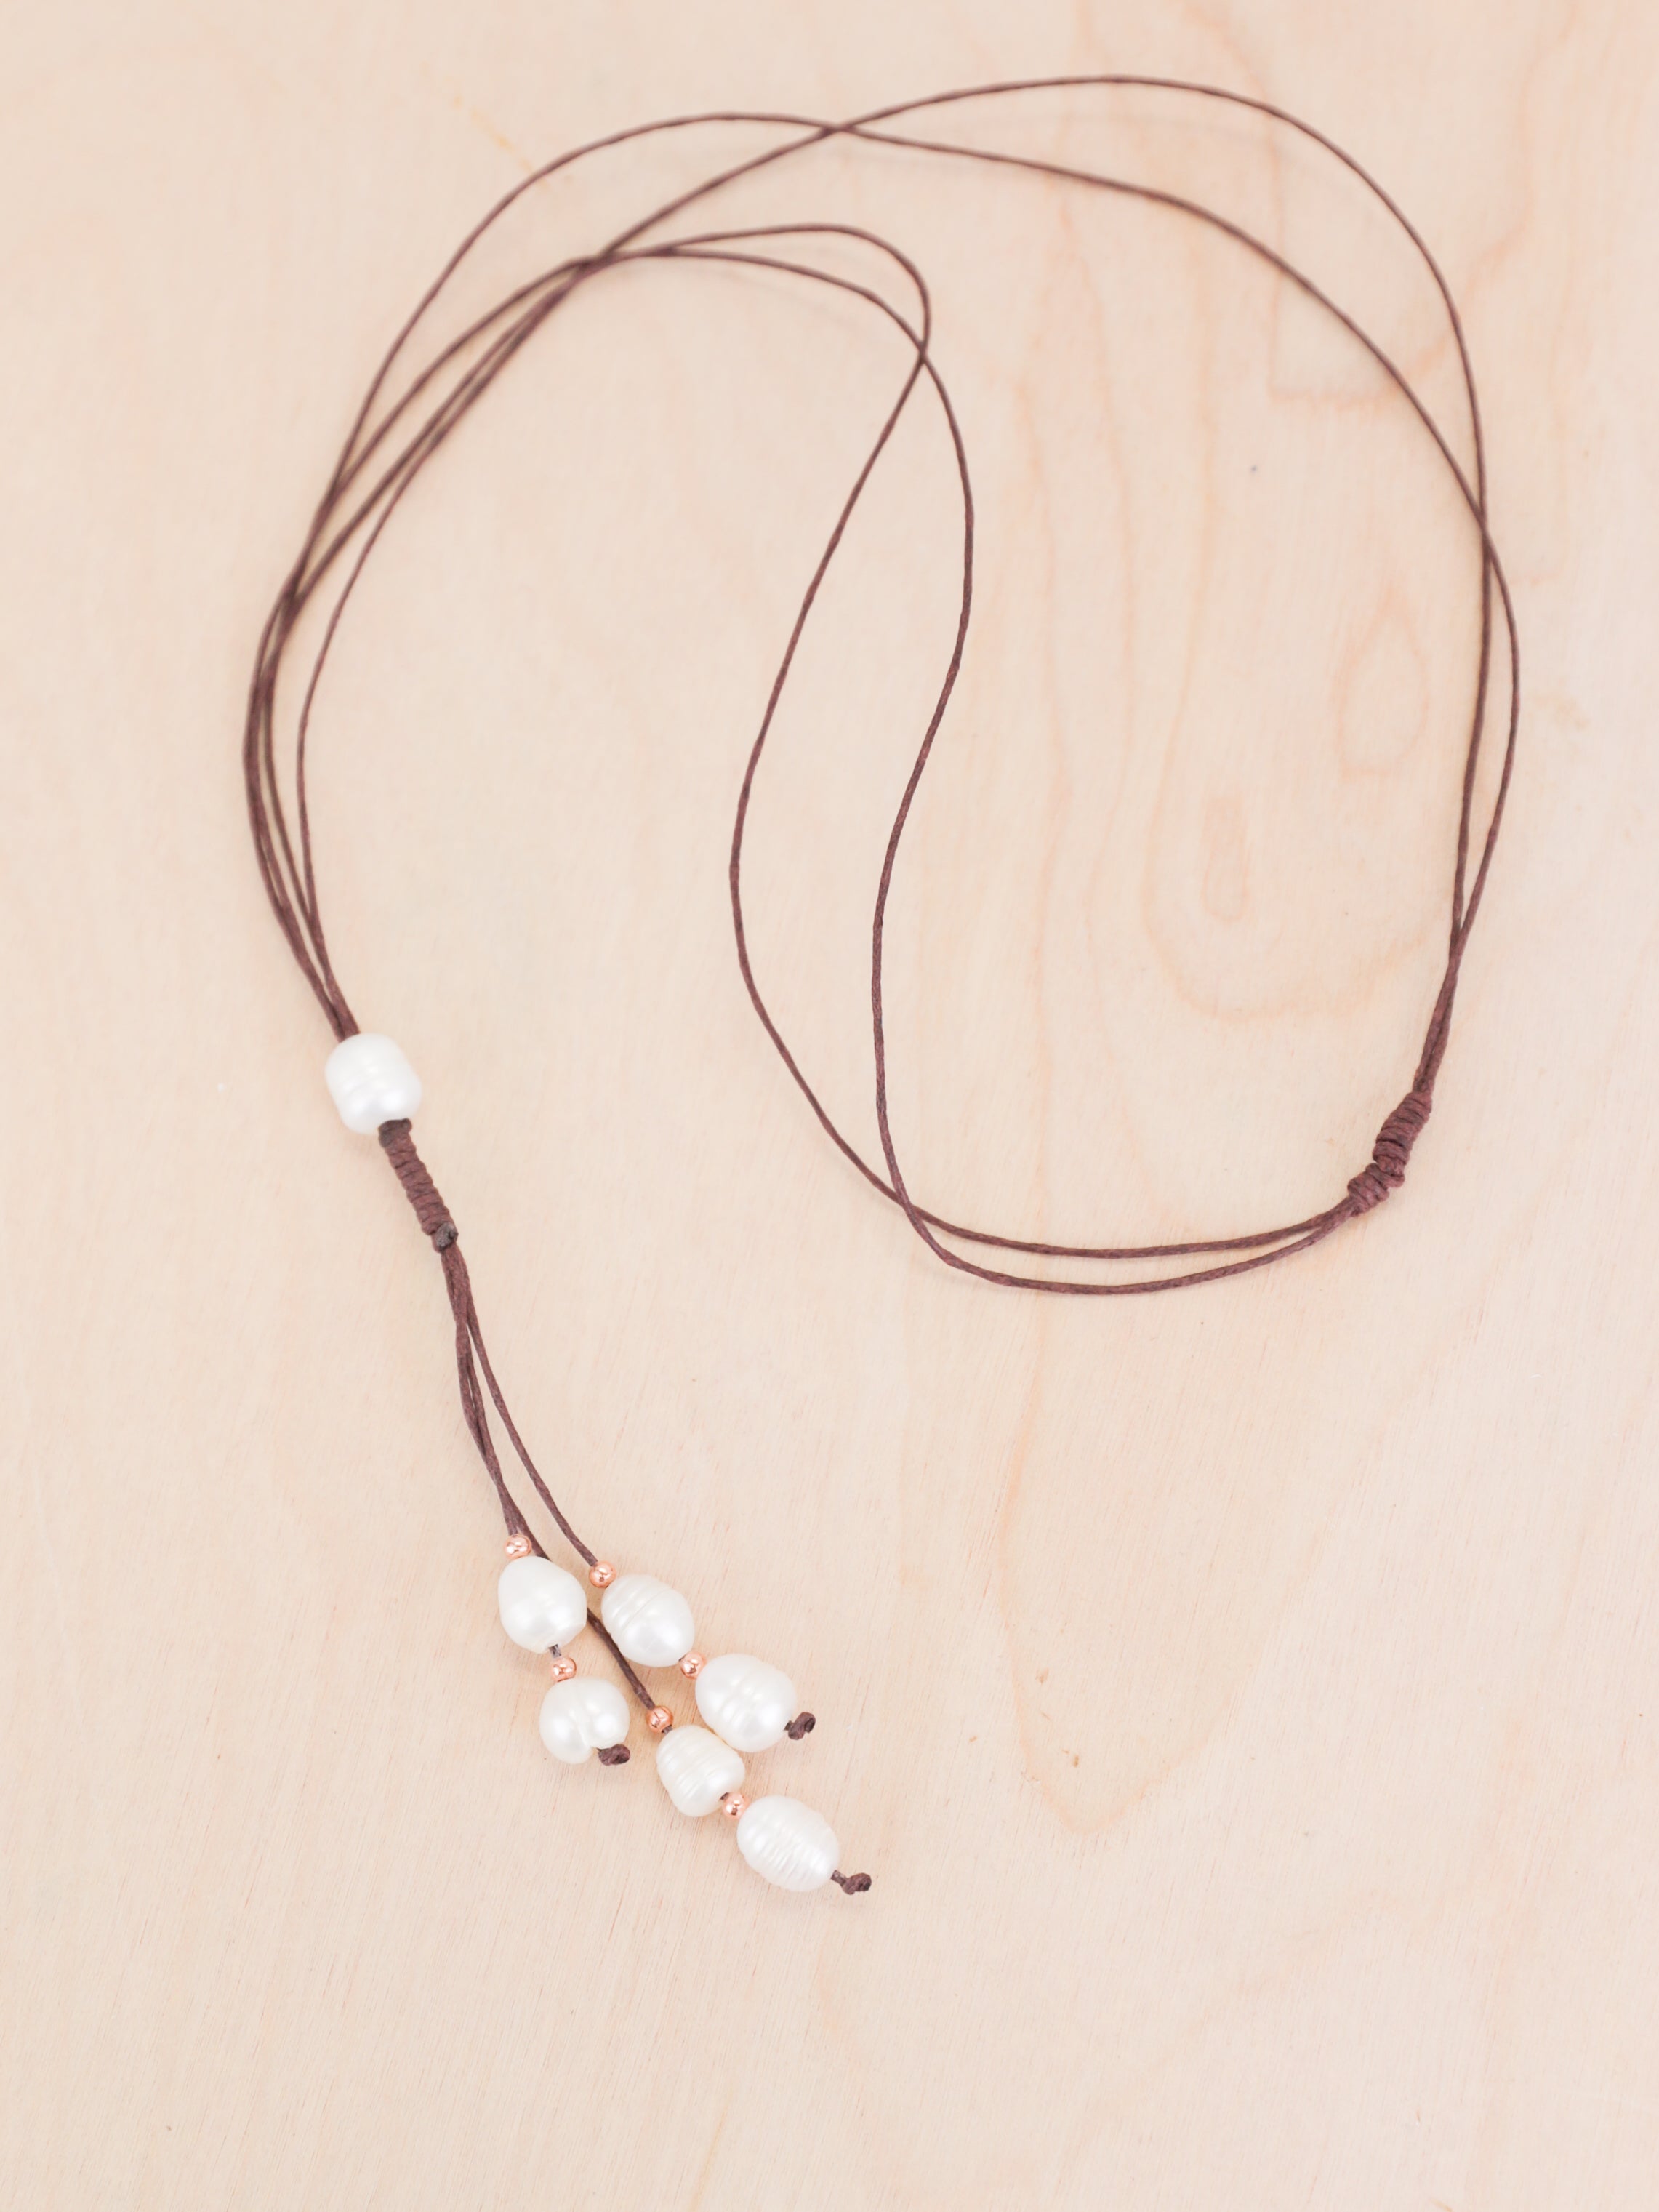 Floating pearl necklace – The Rustic Boho Chic Jewelry